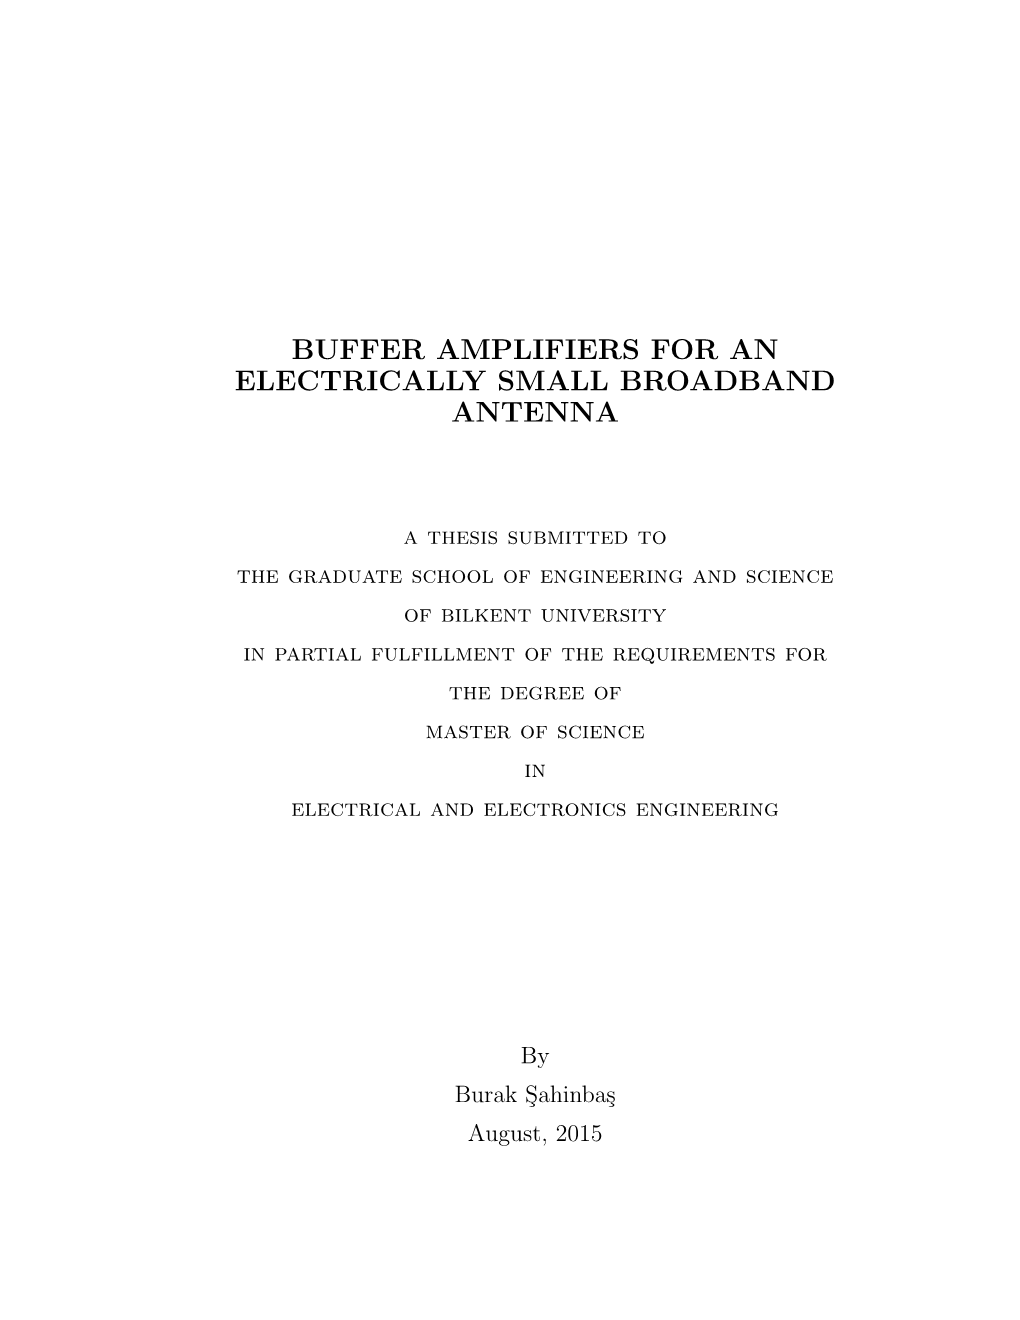 Buffer Amplifiers for an Electrically Small Broadband Antenna